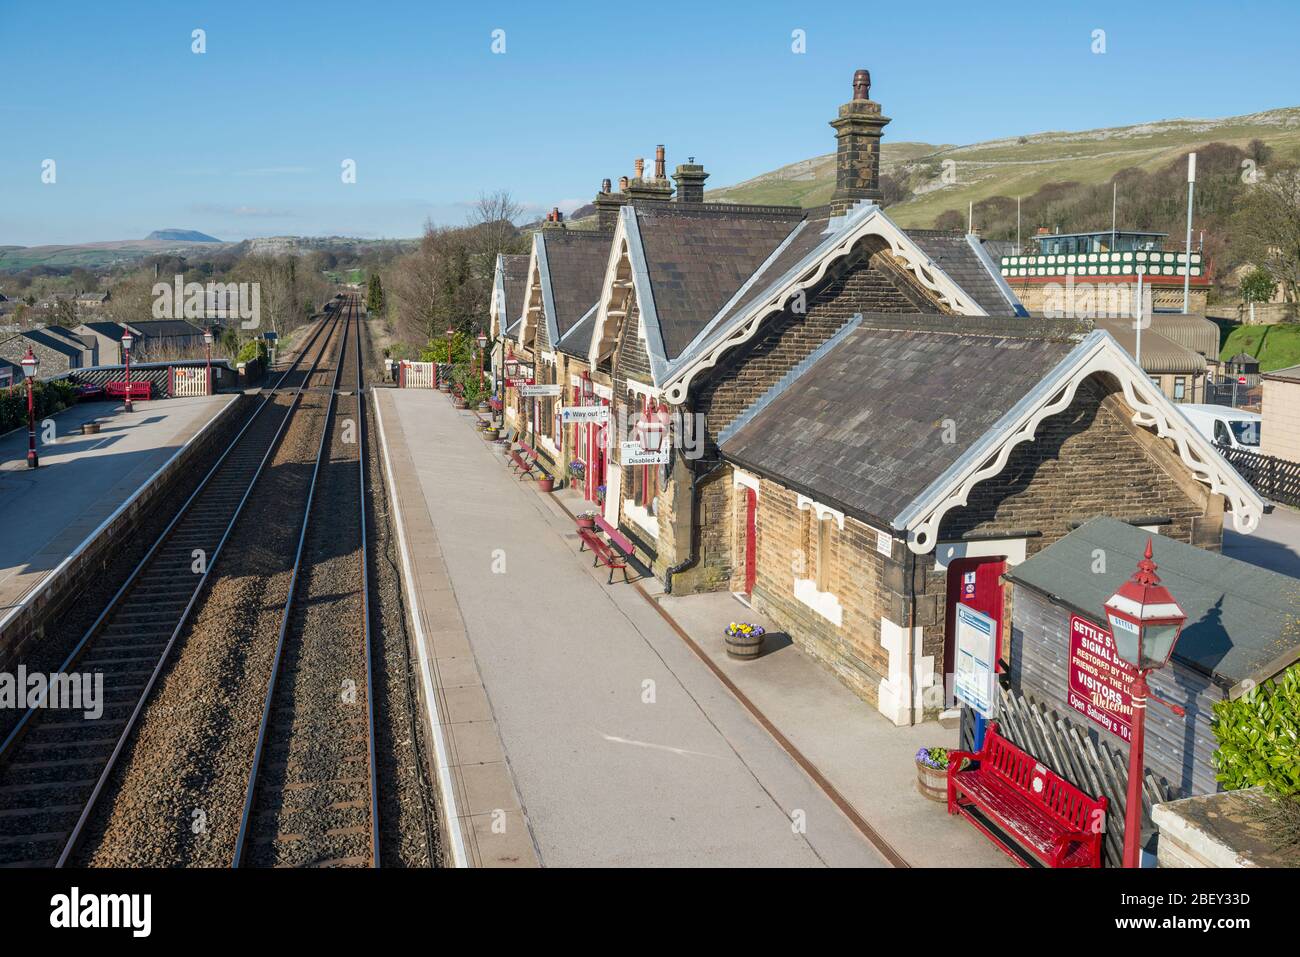 The traditionally styled footbridge and train station at Settle on the famous Settle to Carlisle railway line Stock Photo